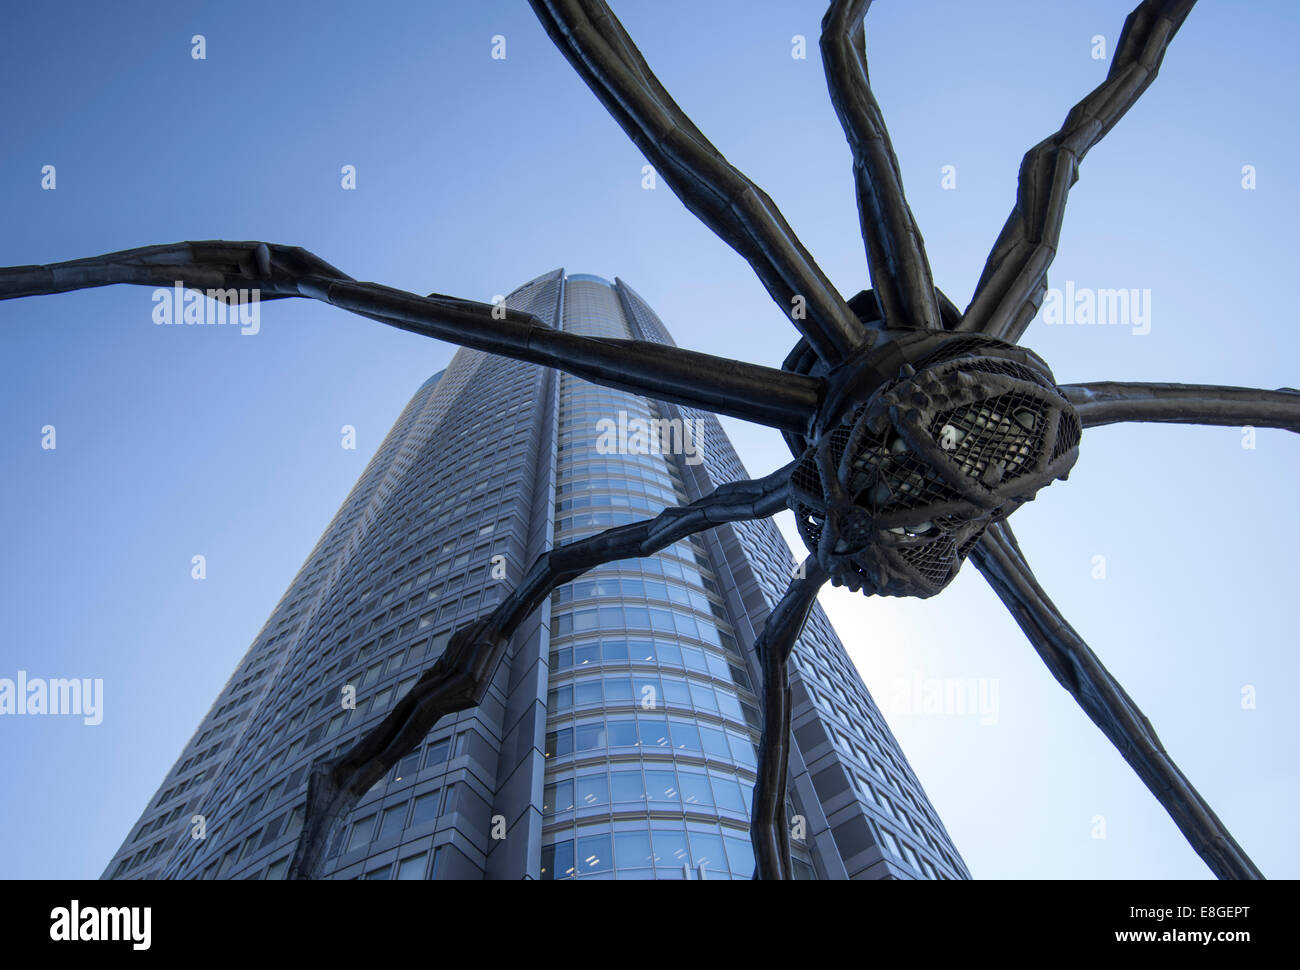 Maman (1999) i bronze, stainless steel, and marble sculpture of spider by the artist Louise Bourgeois  at the base of Mori Tower Stock Photo